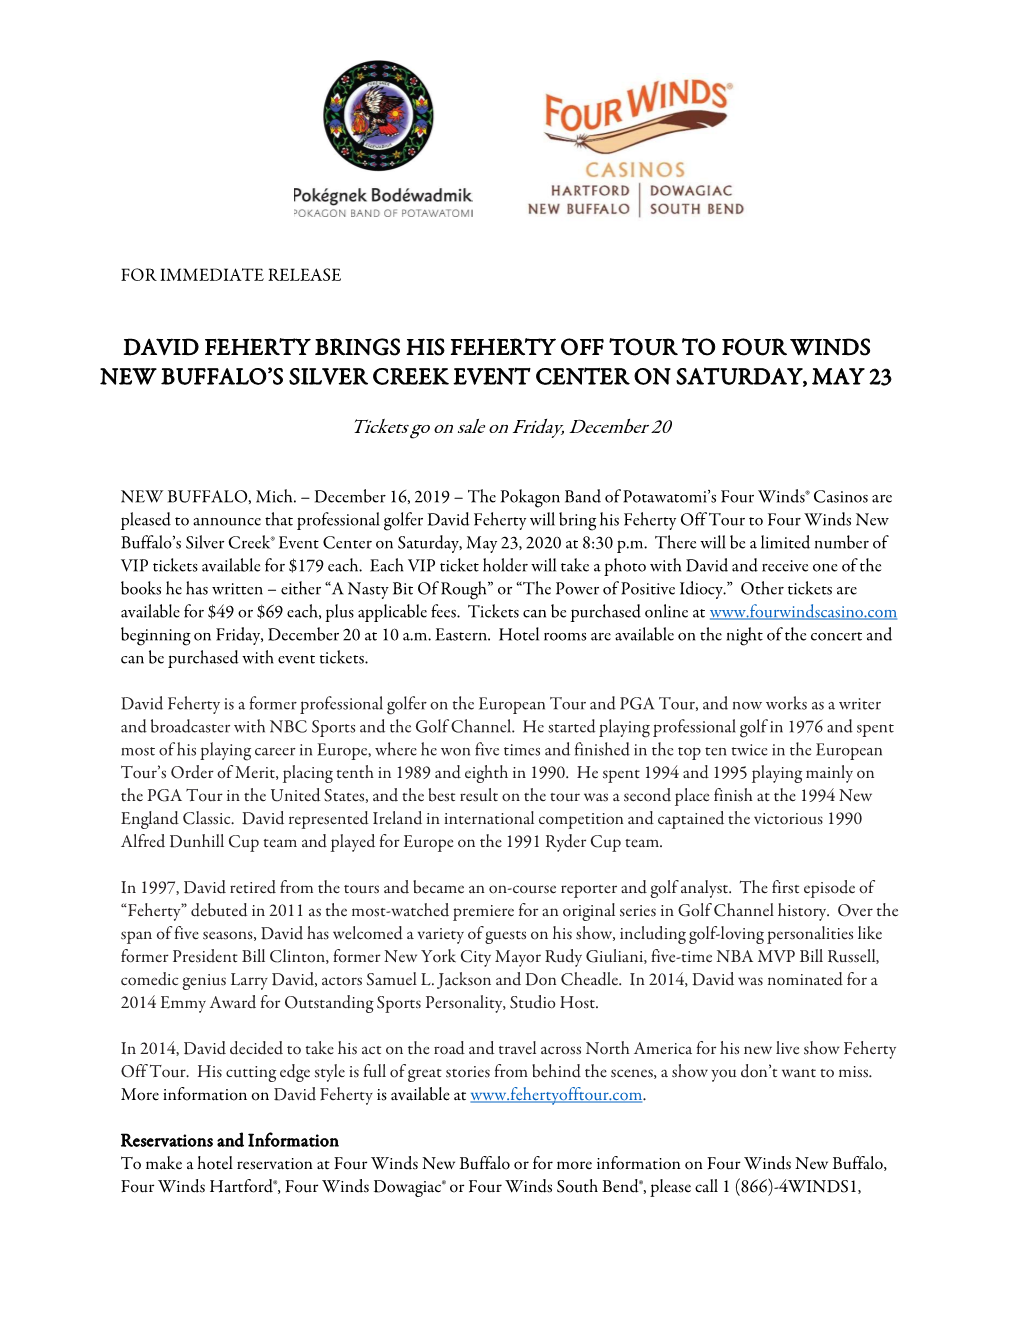 David Feherty Brings His Feherty Off Tour to Four Winds New Buffalo's Silver Creek Event Center on Saturday, May 23